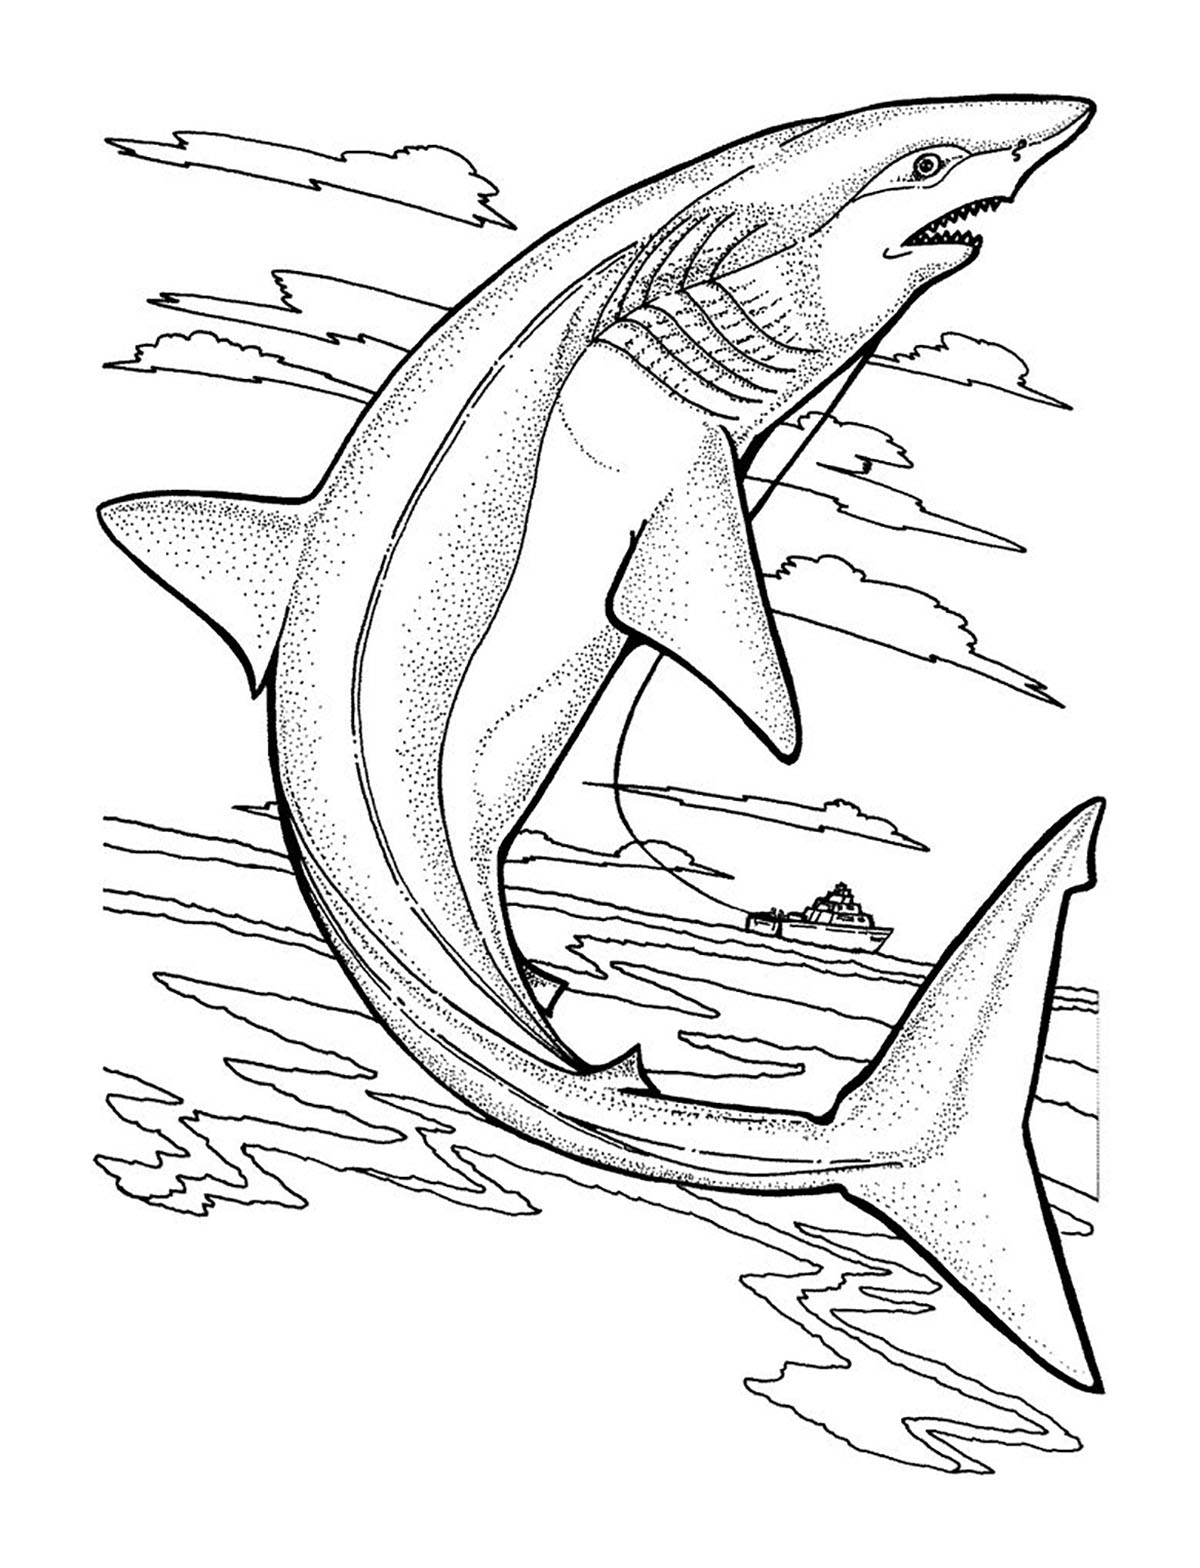 24 Printable Shark Coloring Pages : Free Coloring Pages